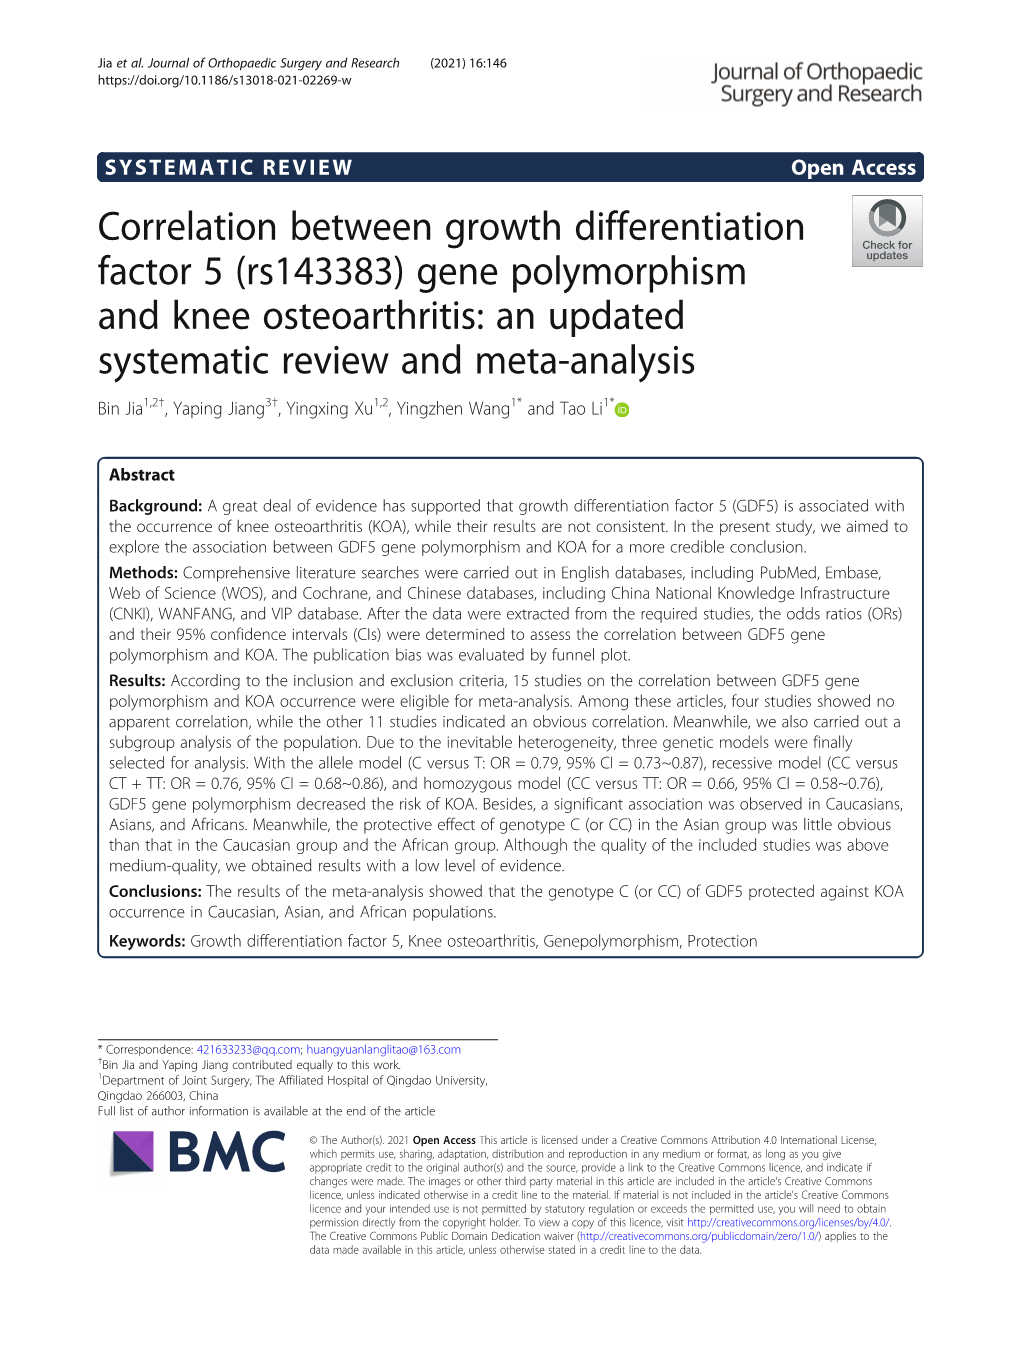 Correlation Between Growth Differentiation Factor 5 (Rs143383) Gene Polymorphism and Knee Osteoarthritis: an Updated Systematic